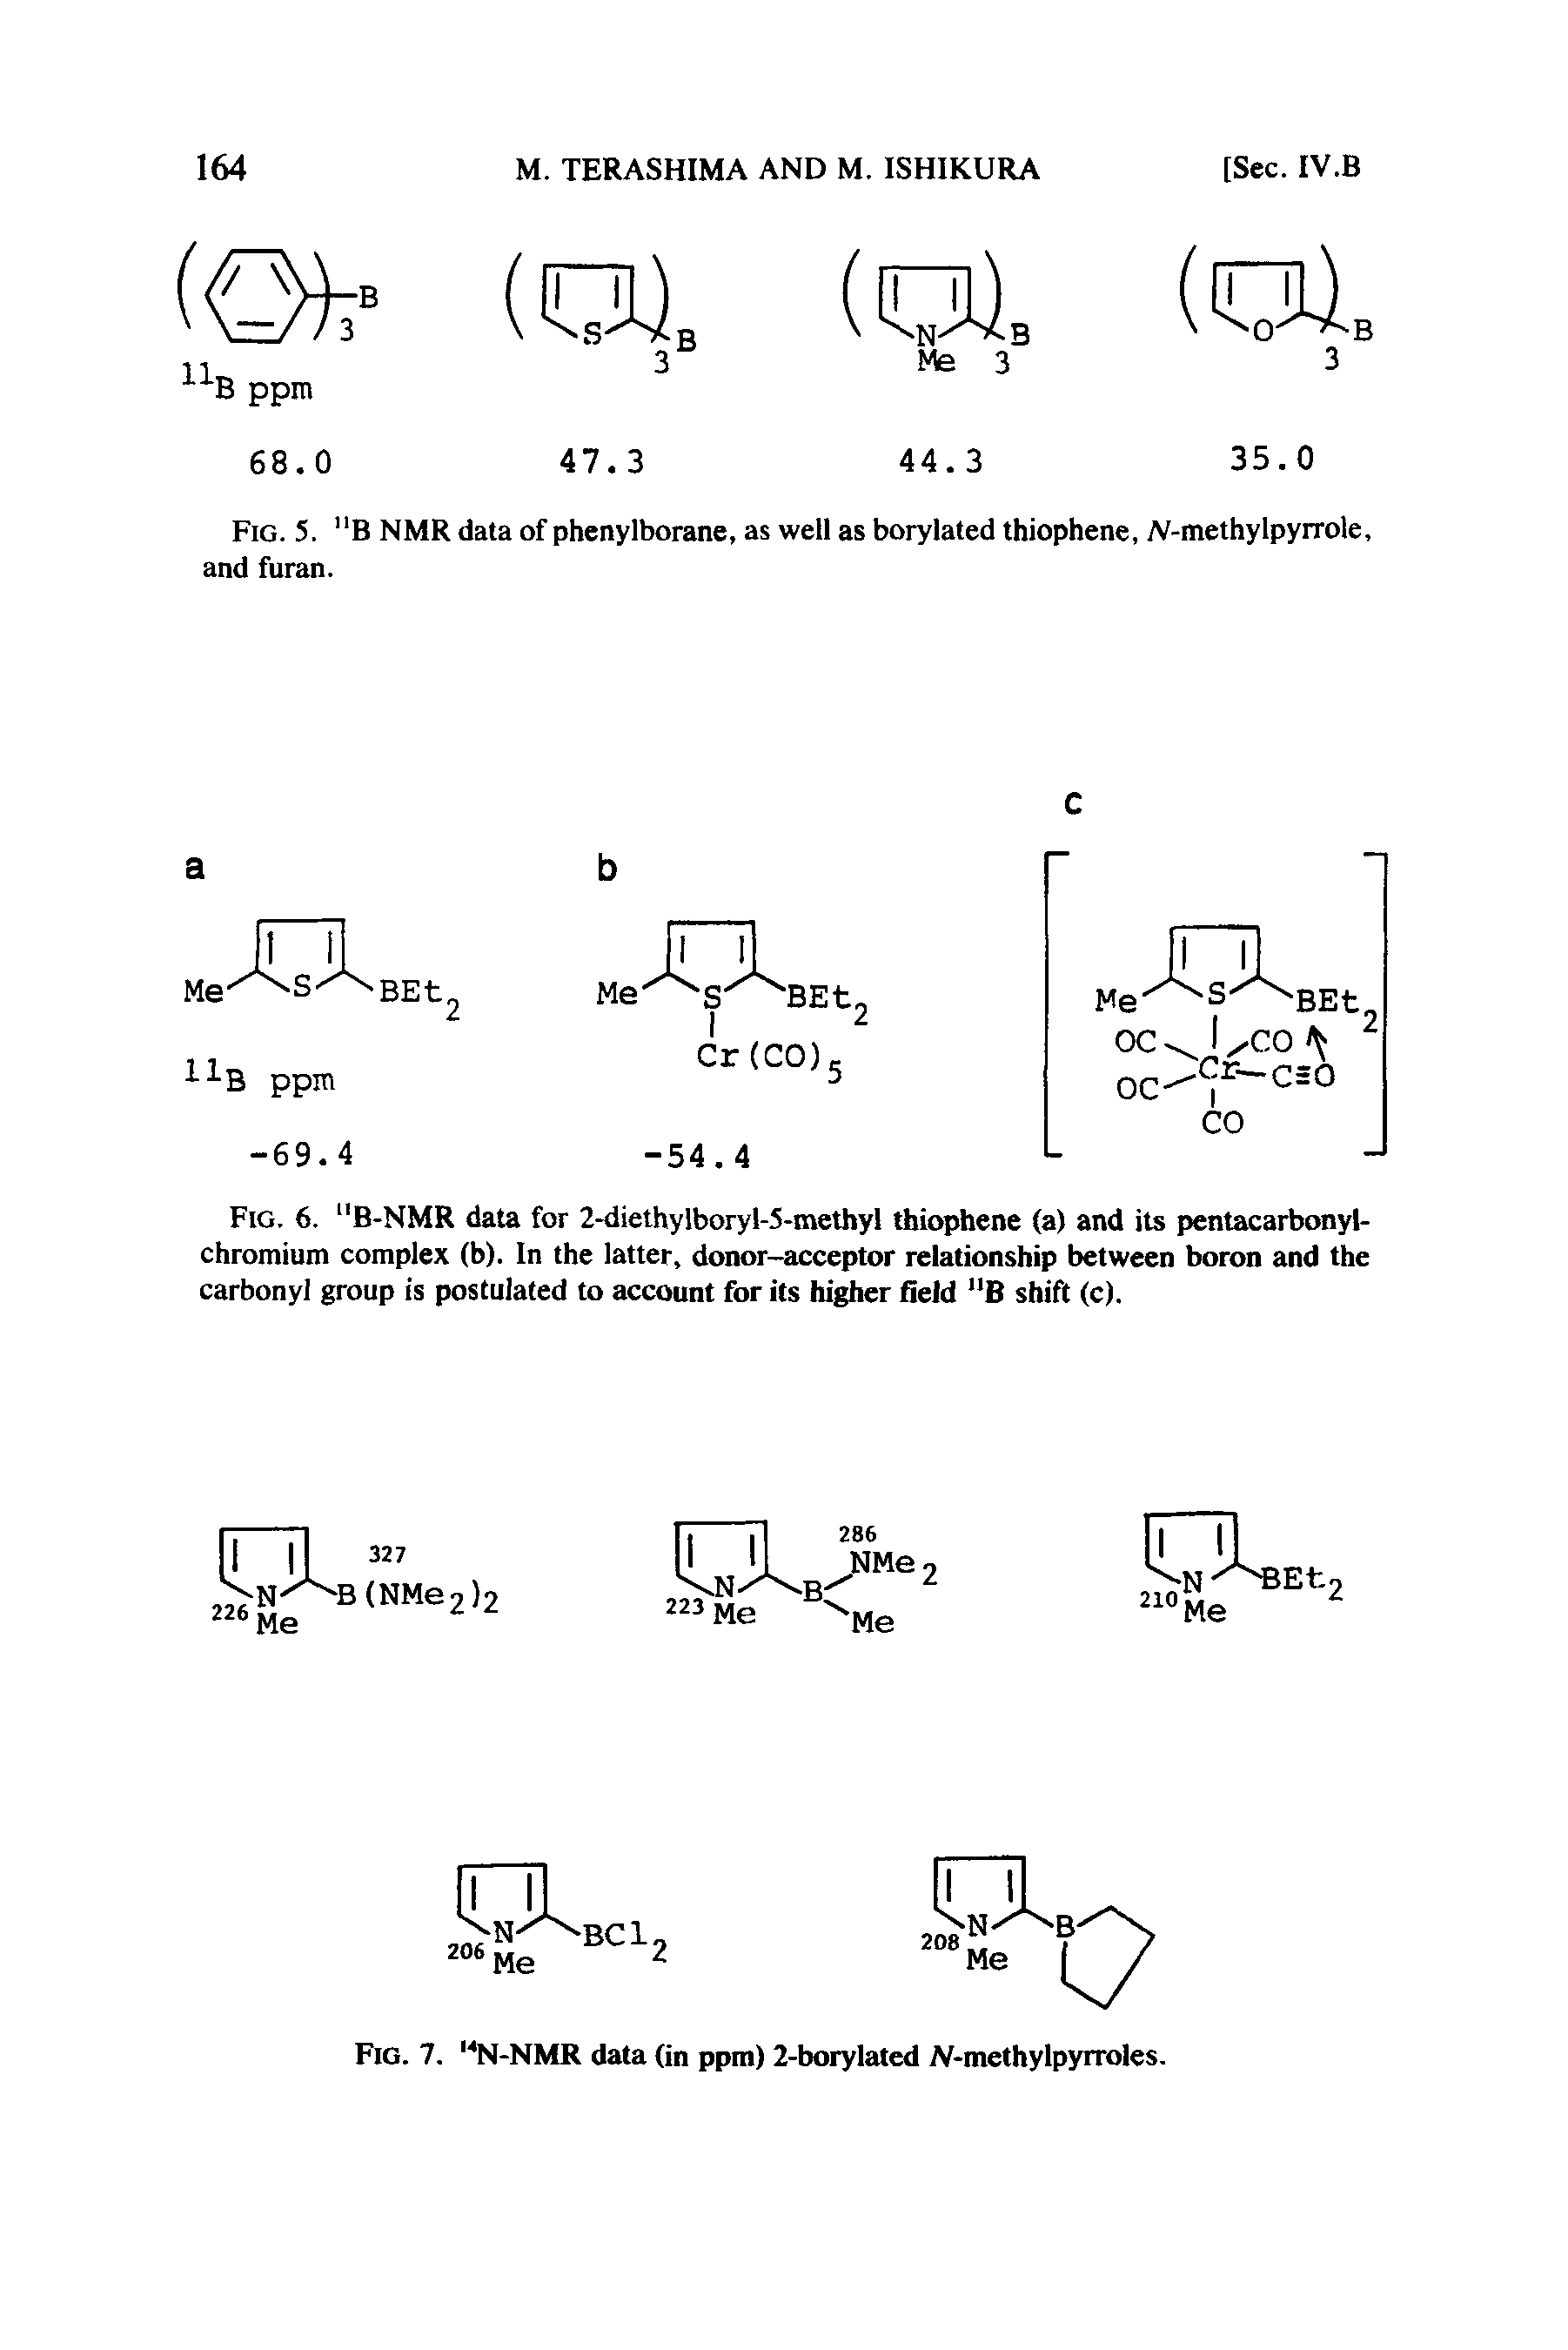 Fig. 6. "B-NMR data for 2-diethylboryl-5-methyl thiophene (a) and its pentacarbonyl-chromium complex (b). In the latter, donor-acceptor relationship between boron and the carbonyl group is postulated to account for its higher field nB shift (c).